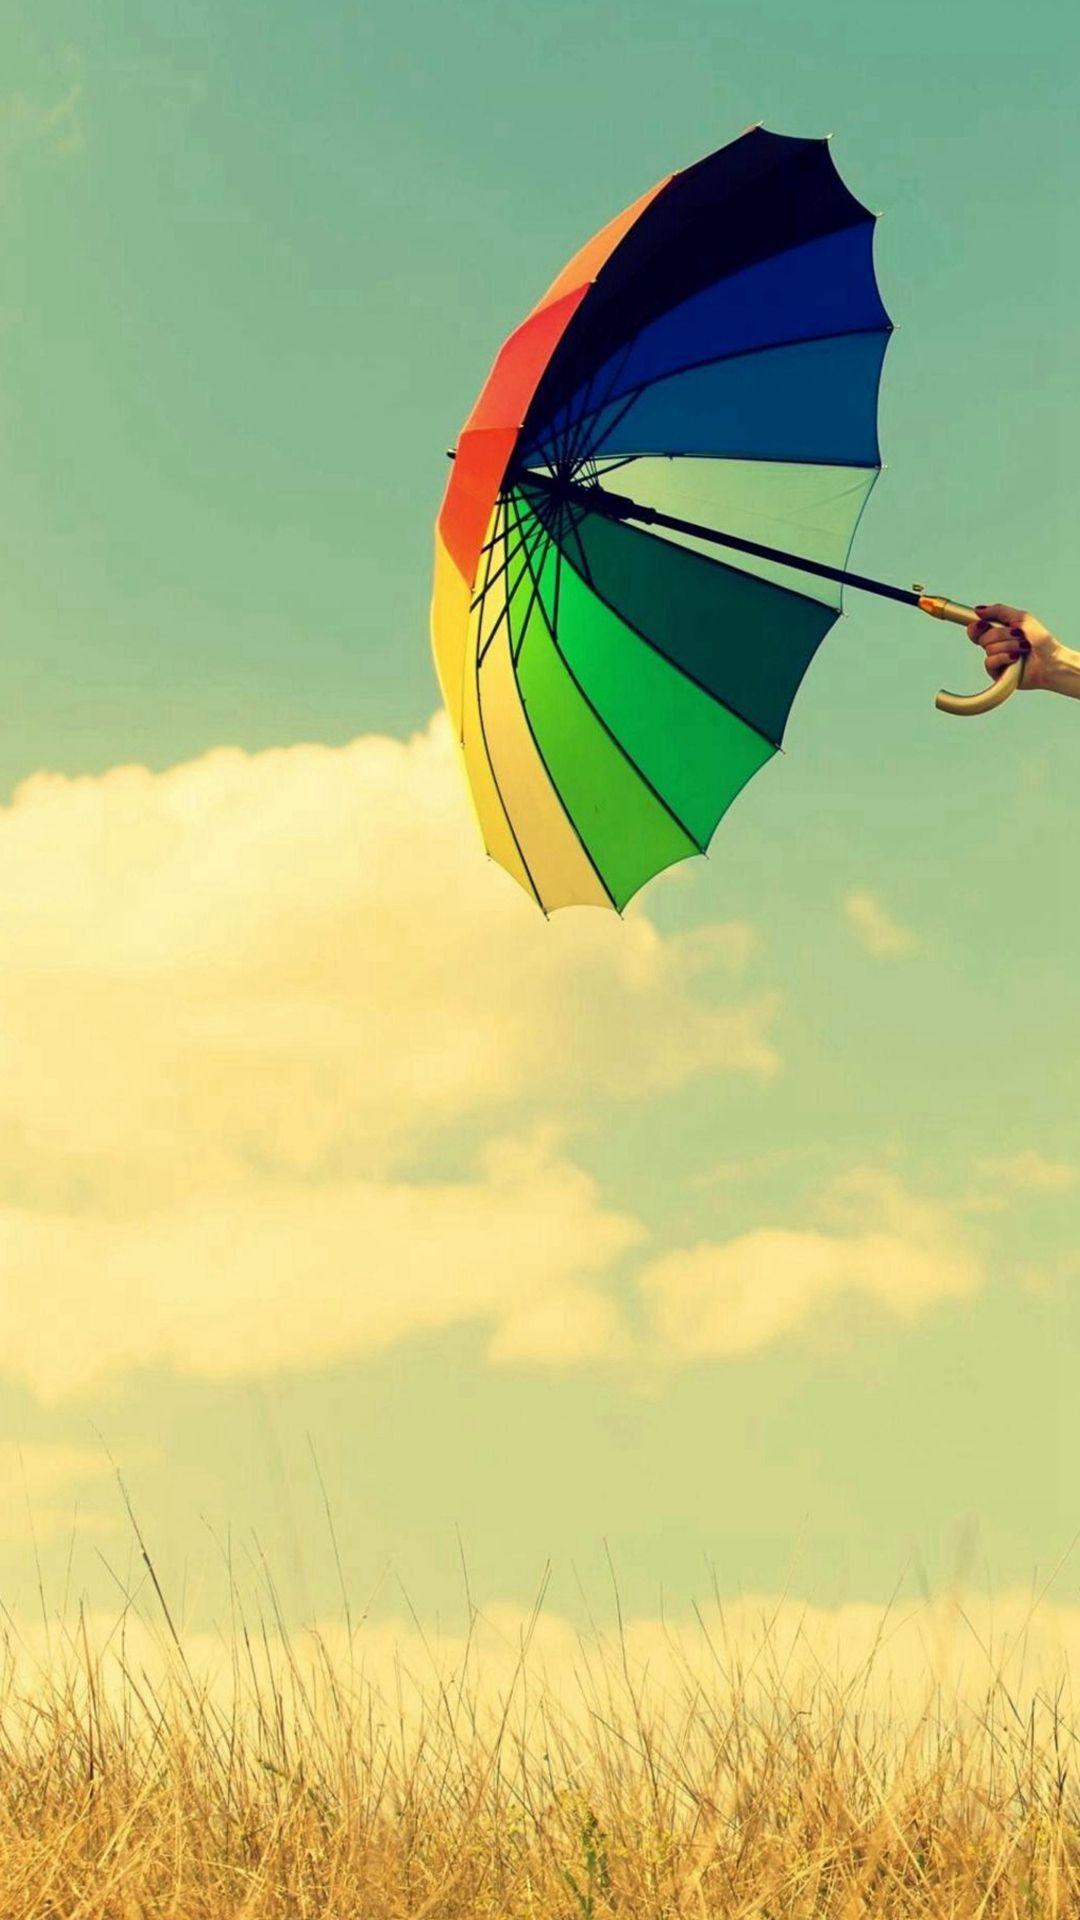 Colorful Umbrella Field Clouds iPhone 8 Wallpaper Download. iPhone